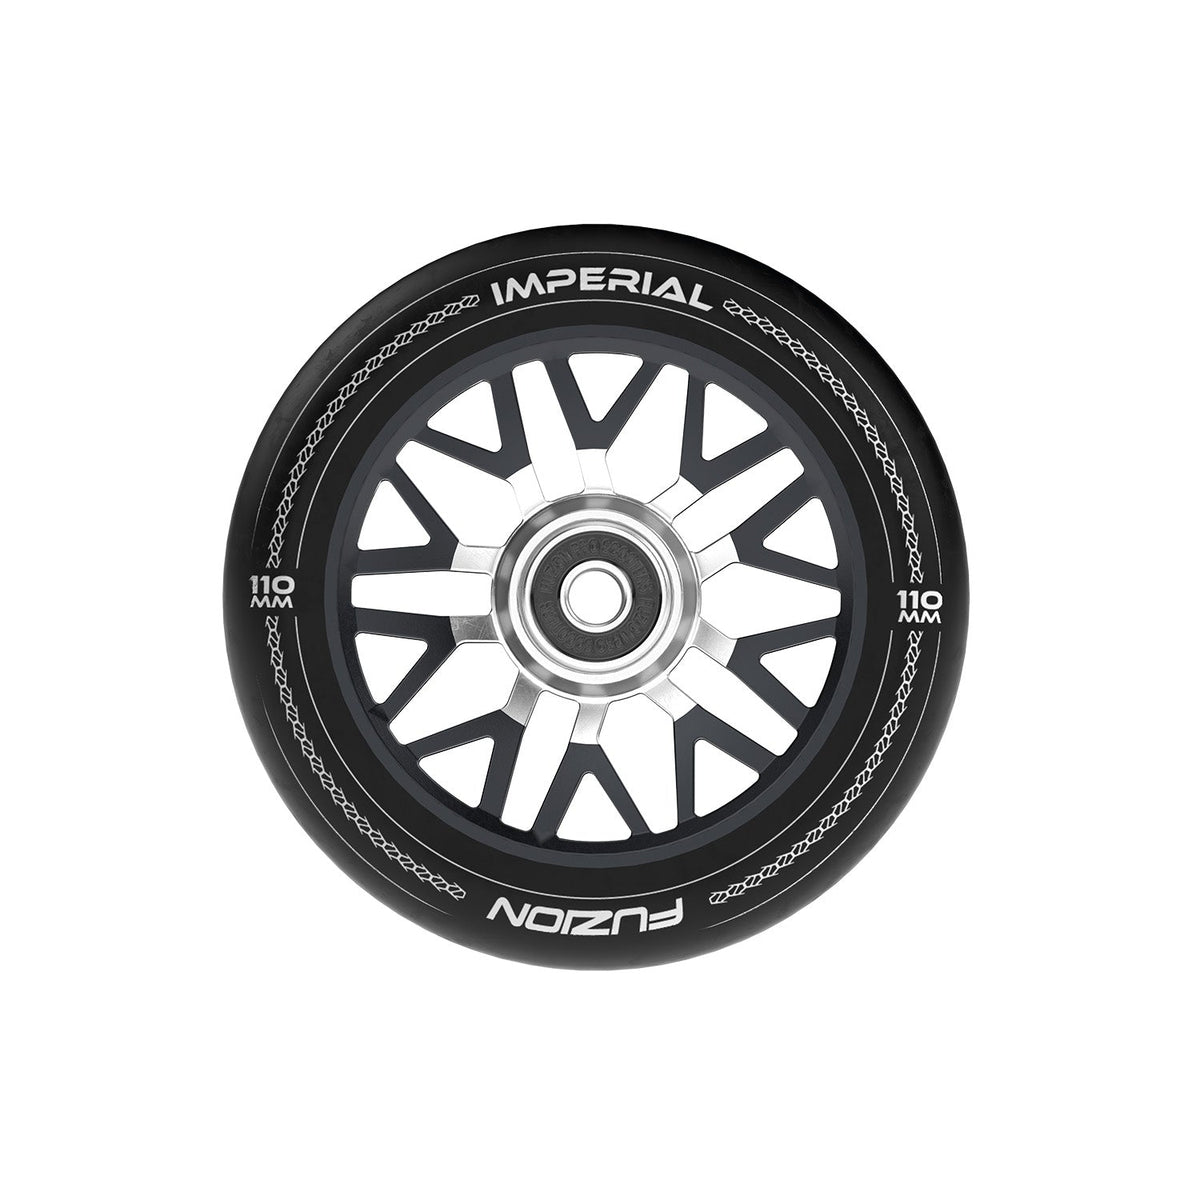 Fuzion Imperial Wheel - Riding Scooters - Bland Pro Shop